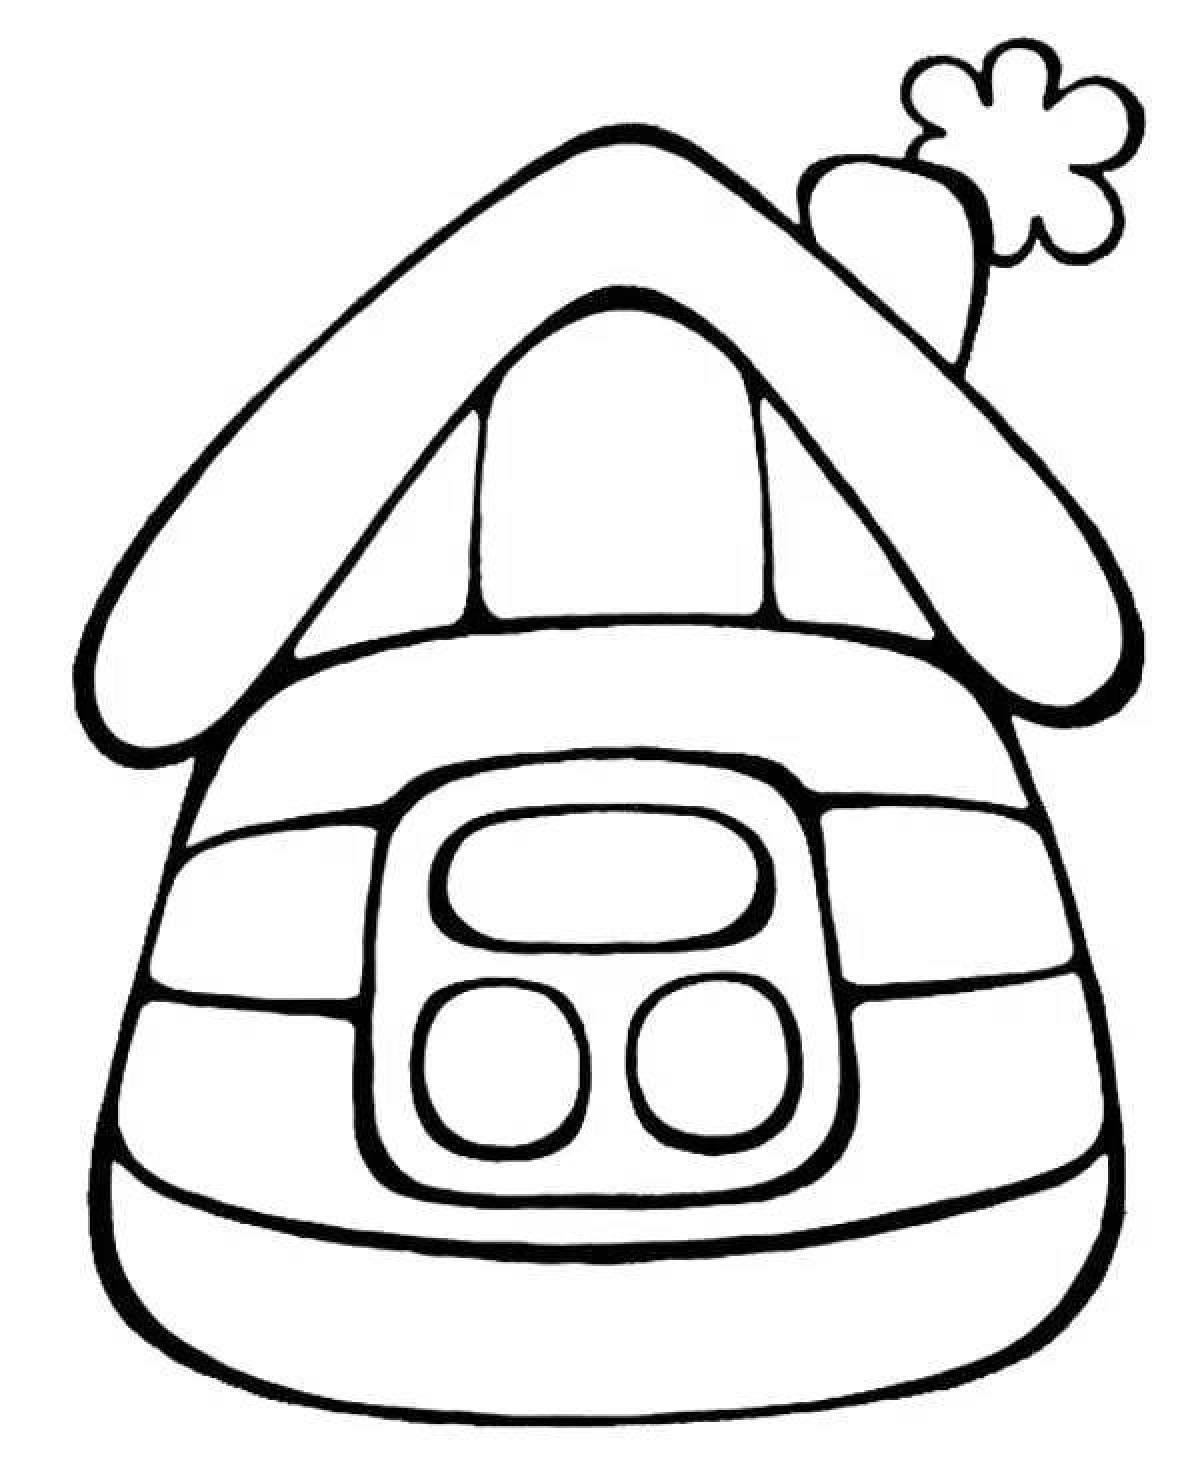 Coloring page cute house for kids 2-3 years old